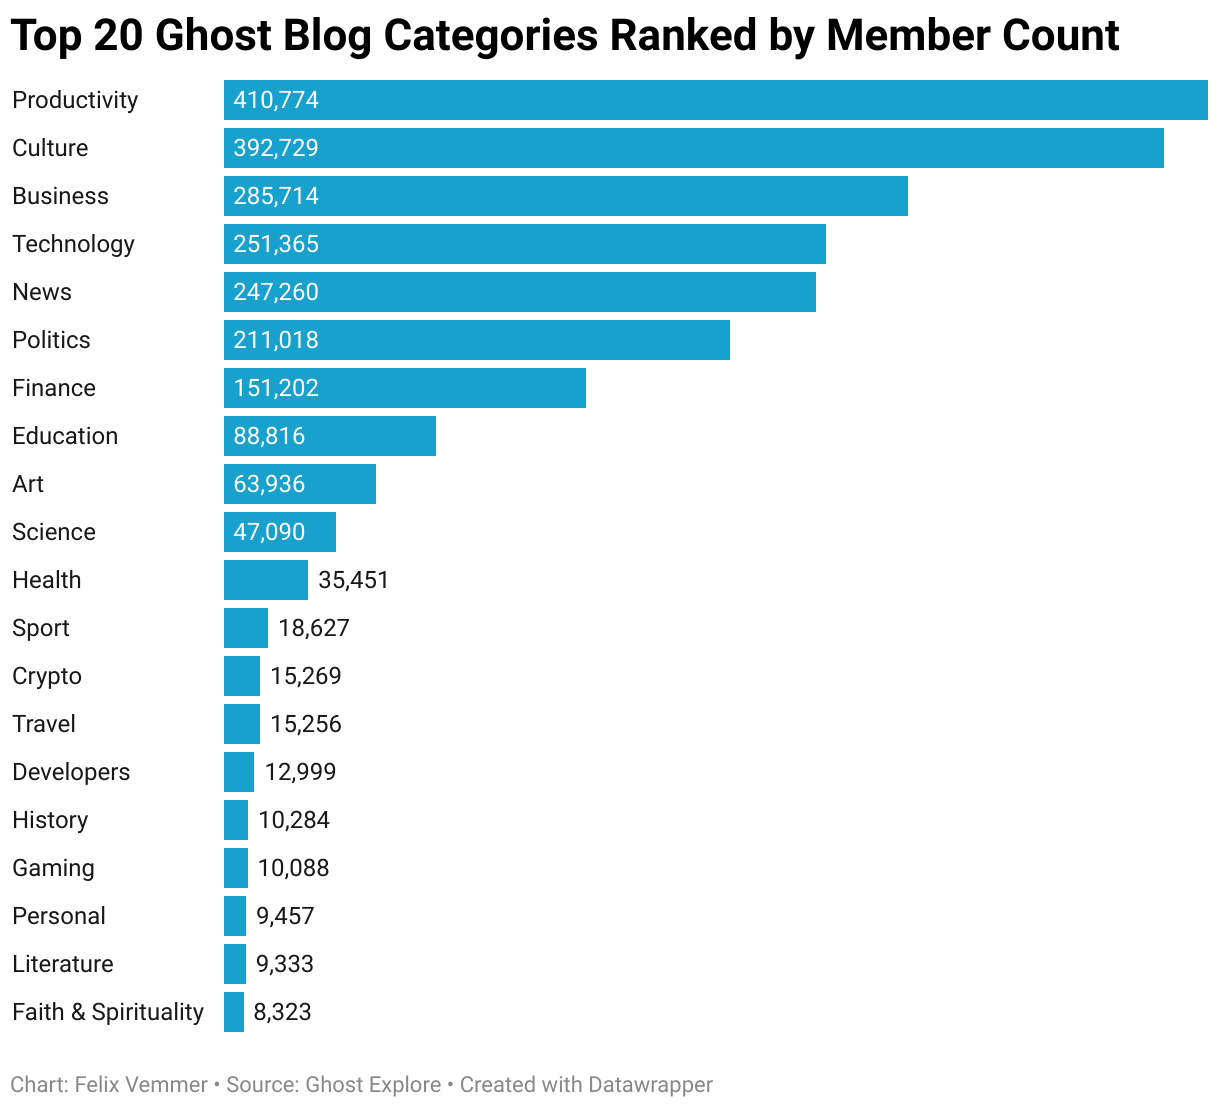 A table showcasing the 20 most popular categories among Ghost blogs, ranked based on their cumulative member count. Each entry lists the category name and its respective total members.